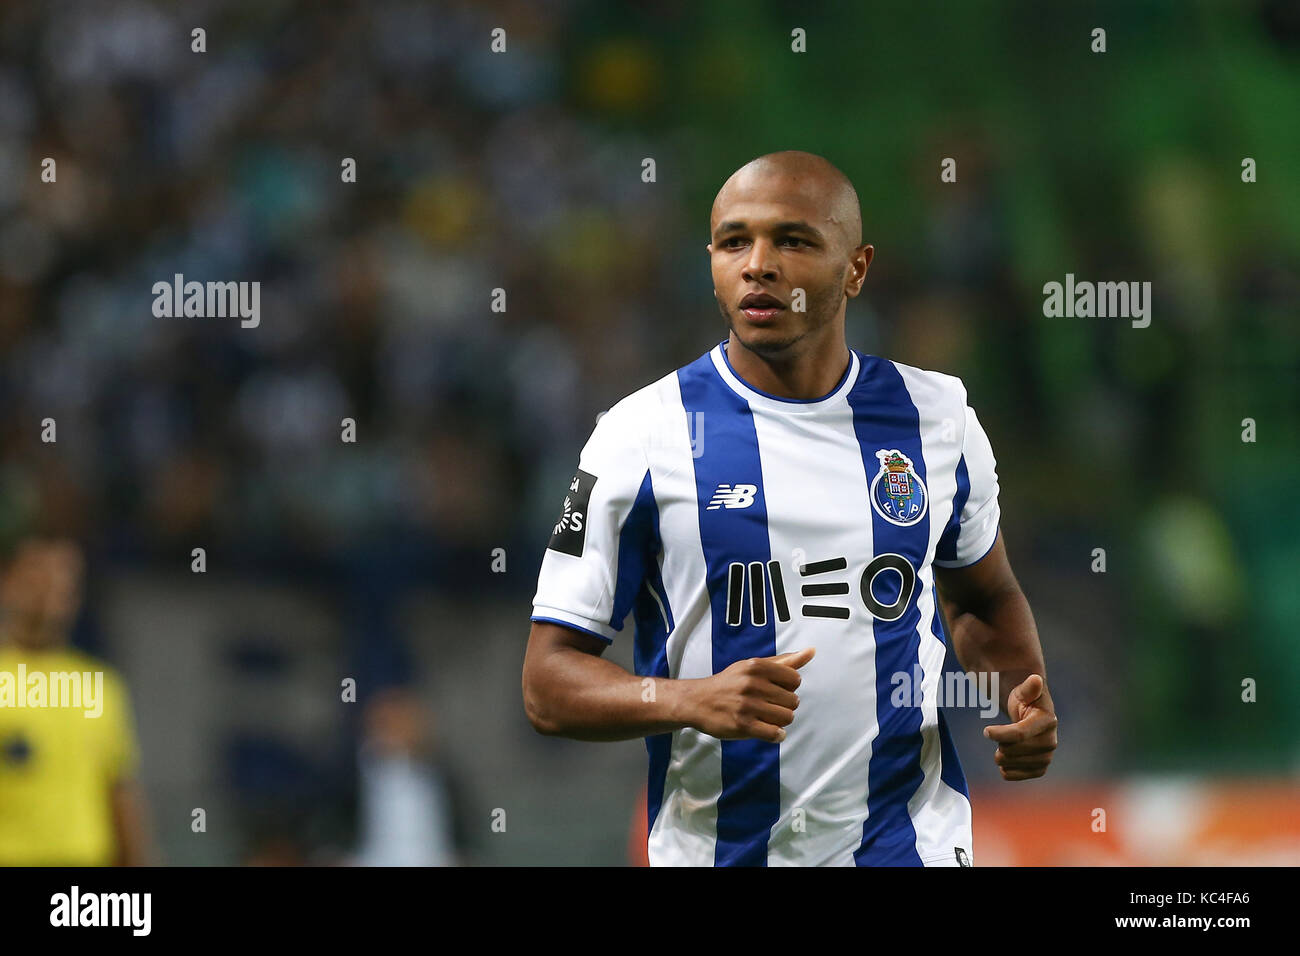 Lisbon, Portugal. 01st Oct, 2017. FC PortoÕs forward Yacine Brahimi from Algeria during Premier League 2017/18 match between Sporting CP and FC Porto, at Alvalade Stadium in Lisbon on October 1, 2017. (Photo by Bruno Barros / DPI) Credit: Bruno Barros/Alamy Live News Stock Photo